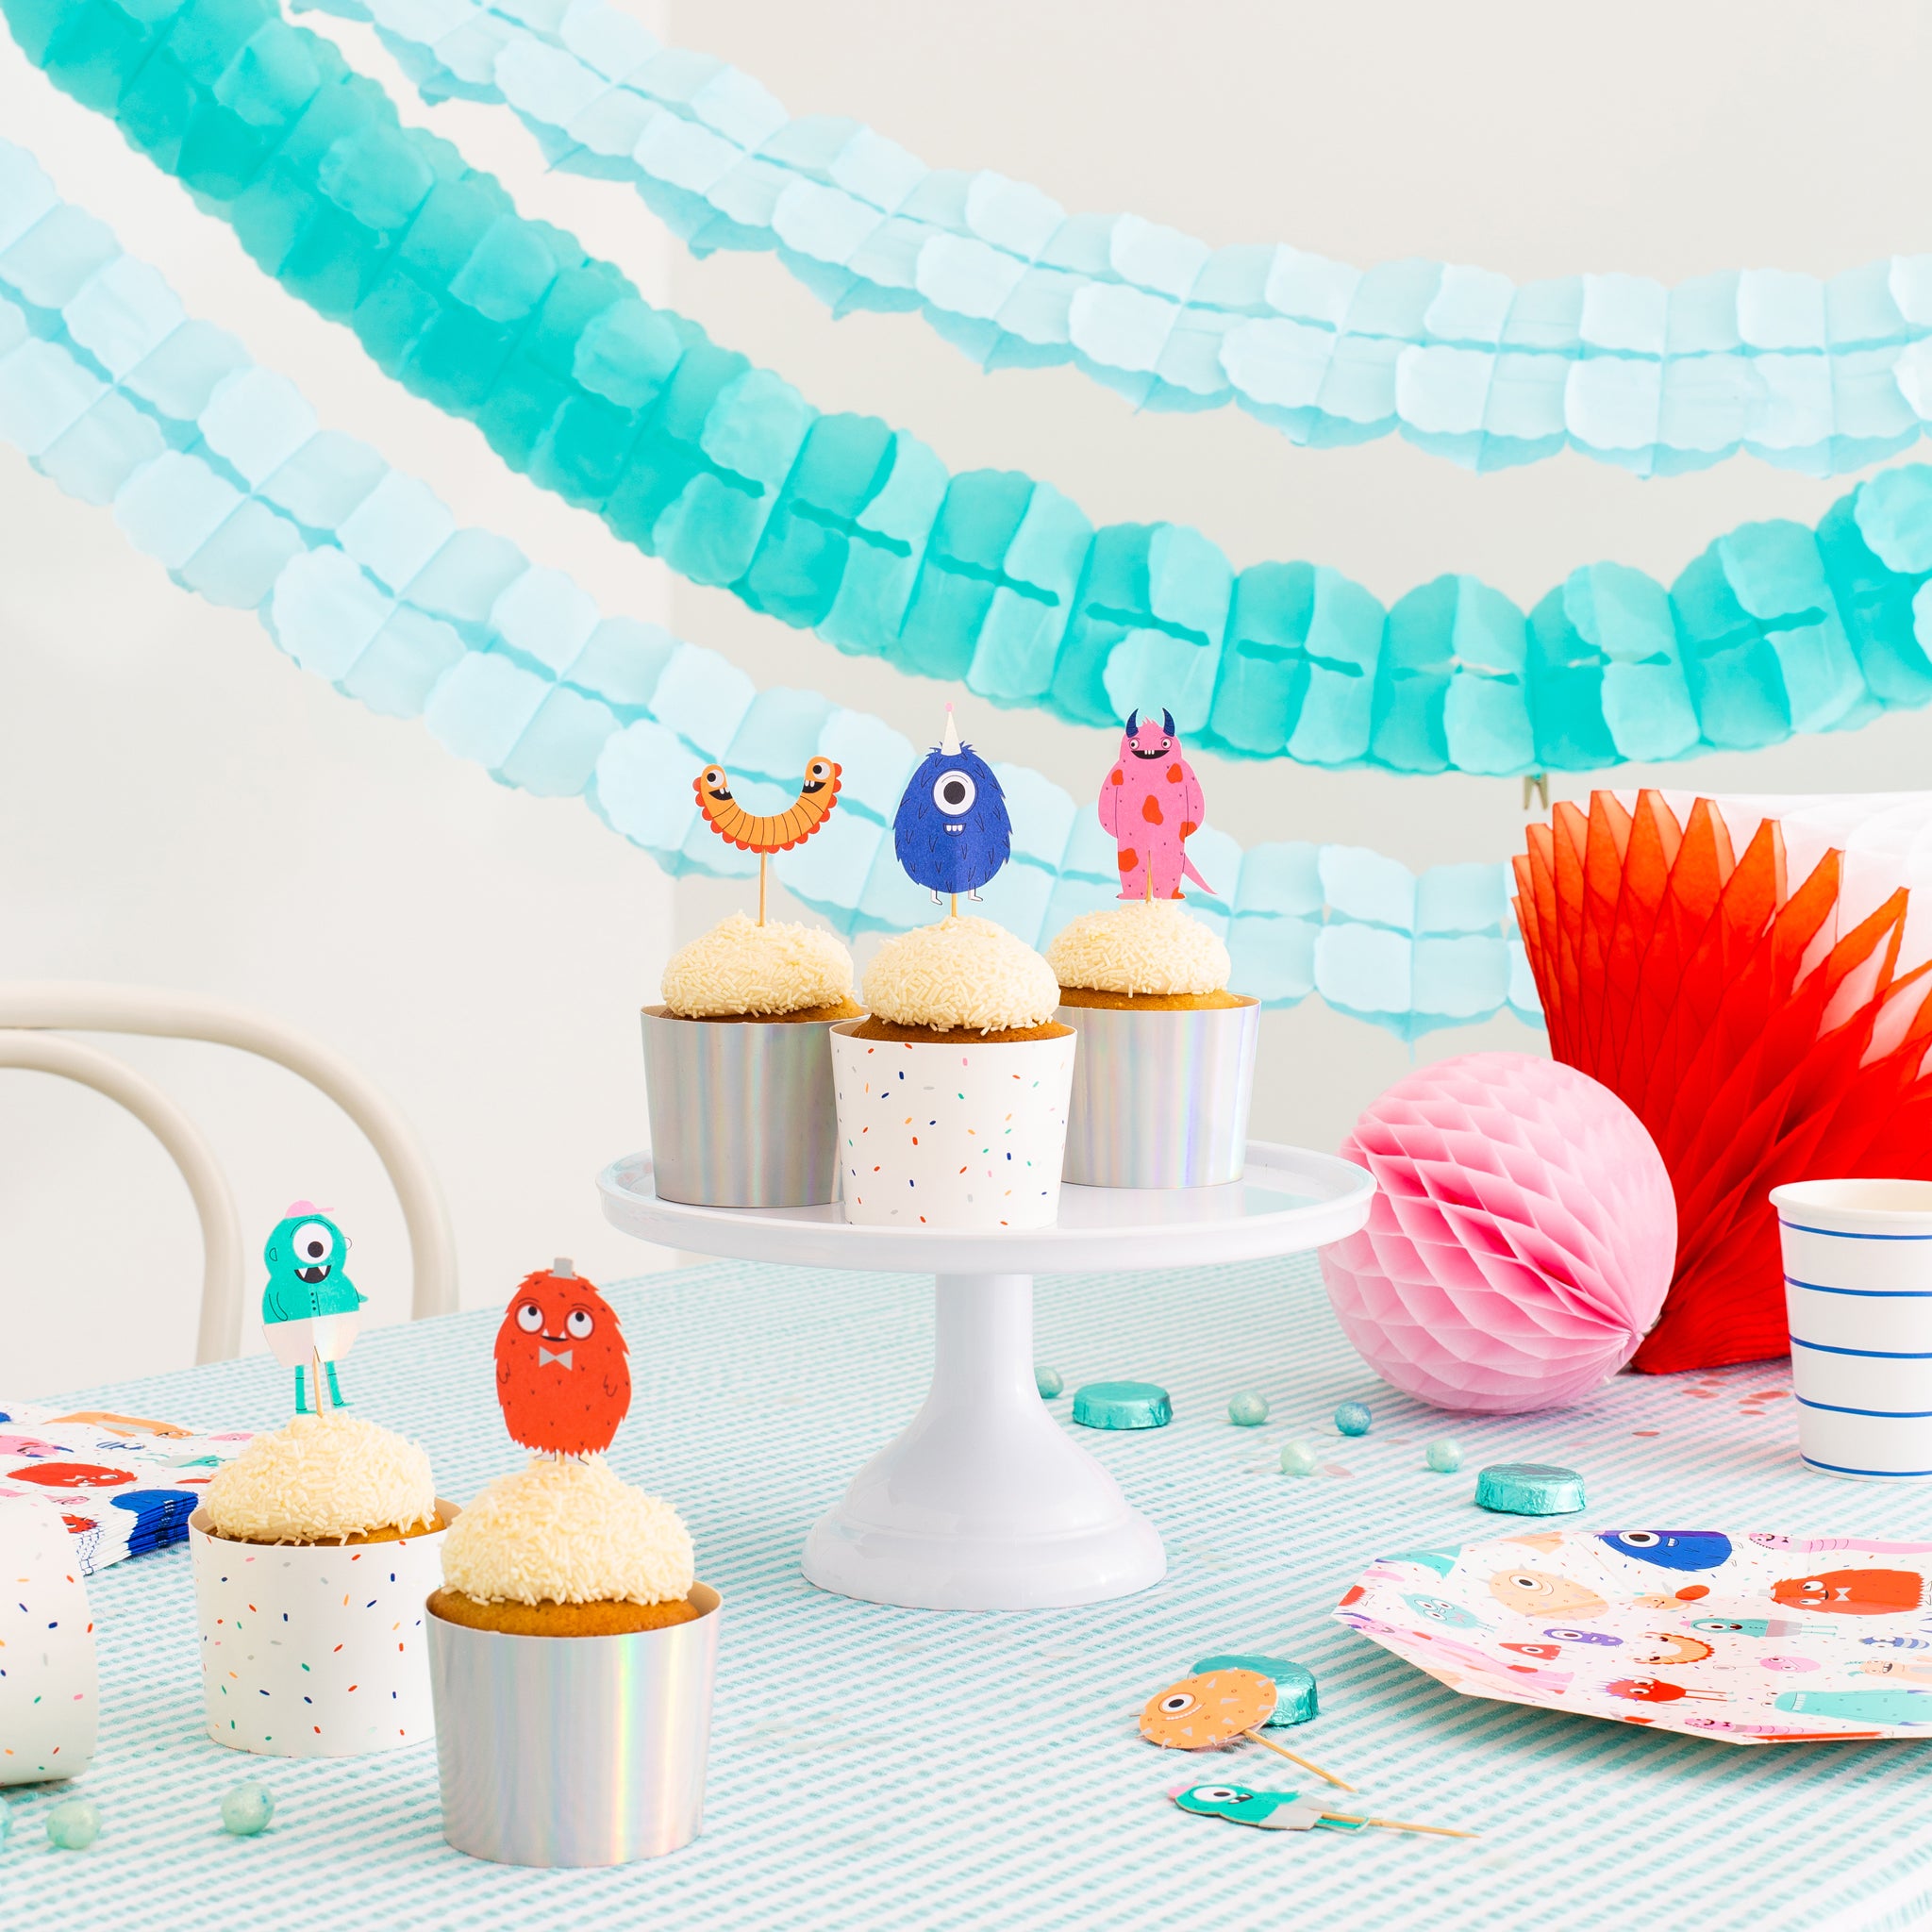 Little Monsters Cupcake Decorating Set, from Daydream Society